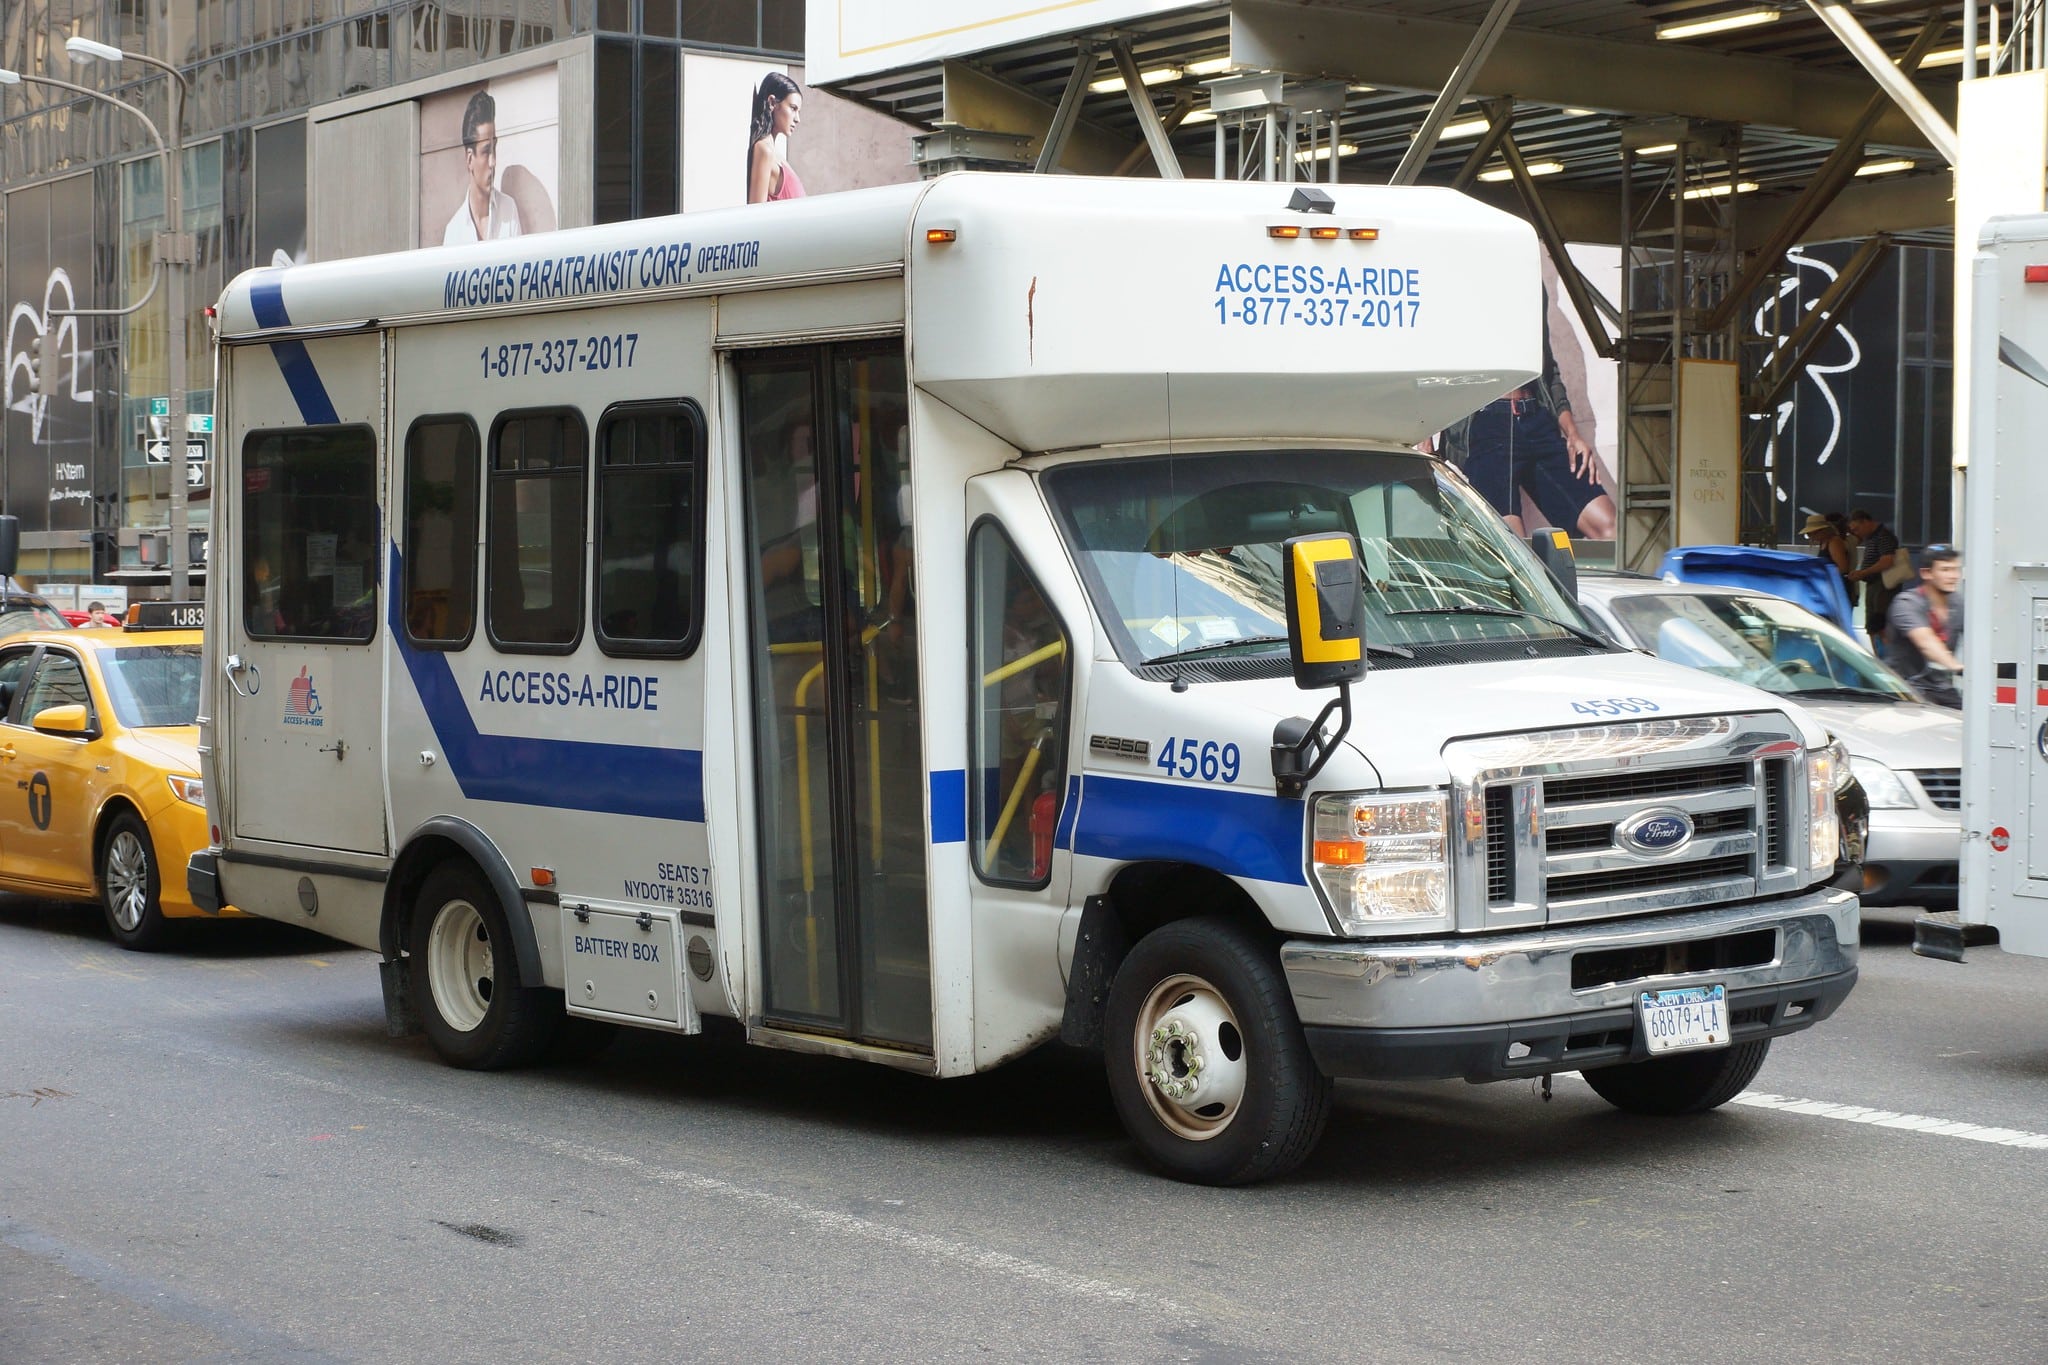 For Manhattanites with disabilities, trek to prove Access-A-Ride worthiness gets worse